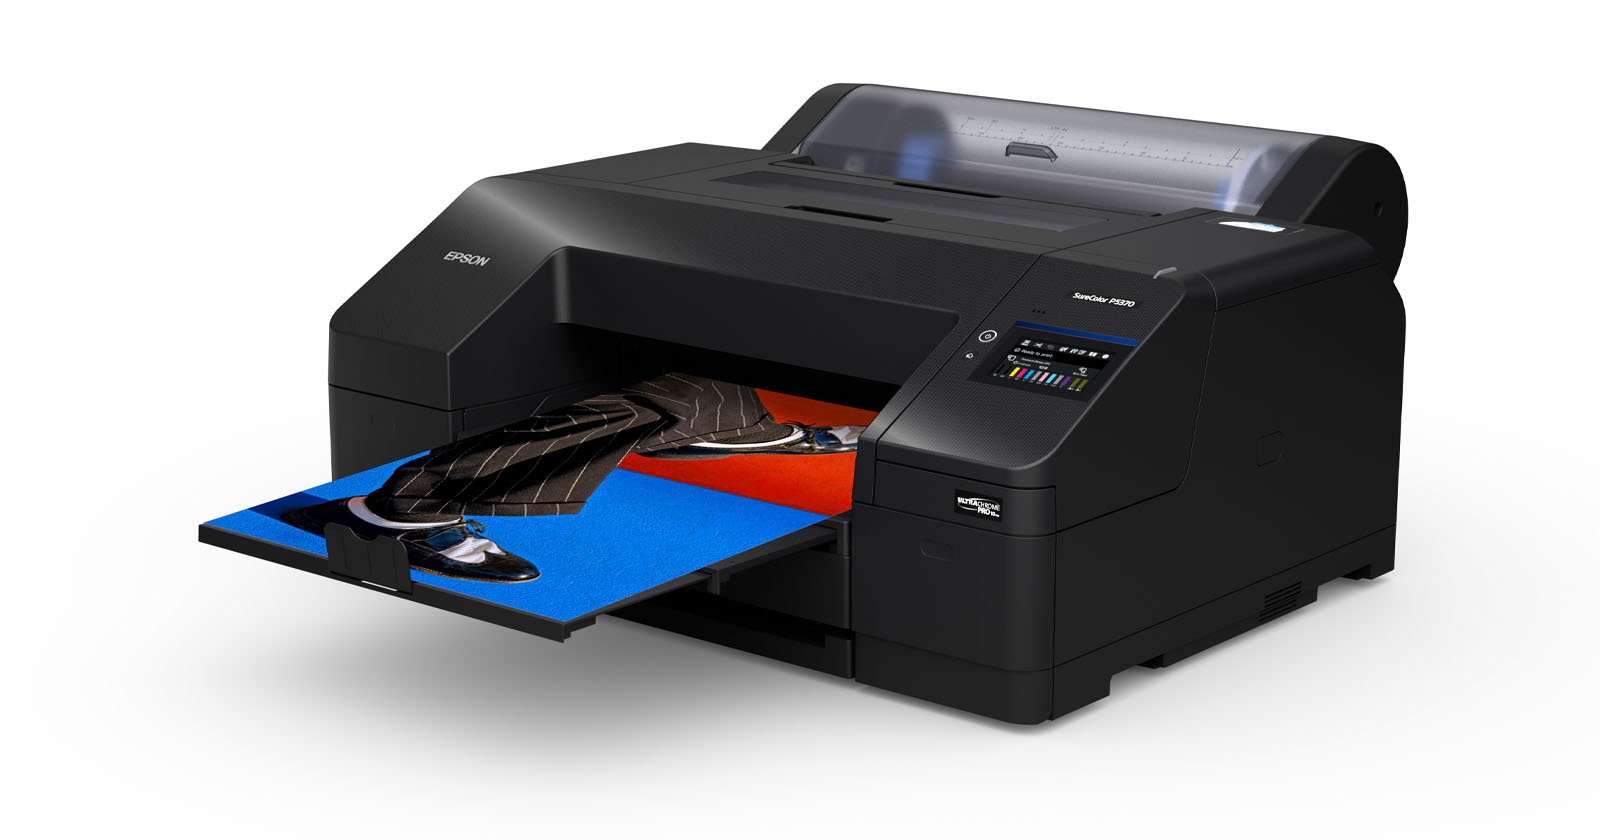 Epson's SureColor P5370 is an New Pro-Level 17-inch Photo Printer